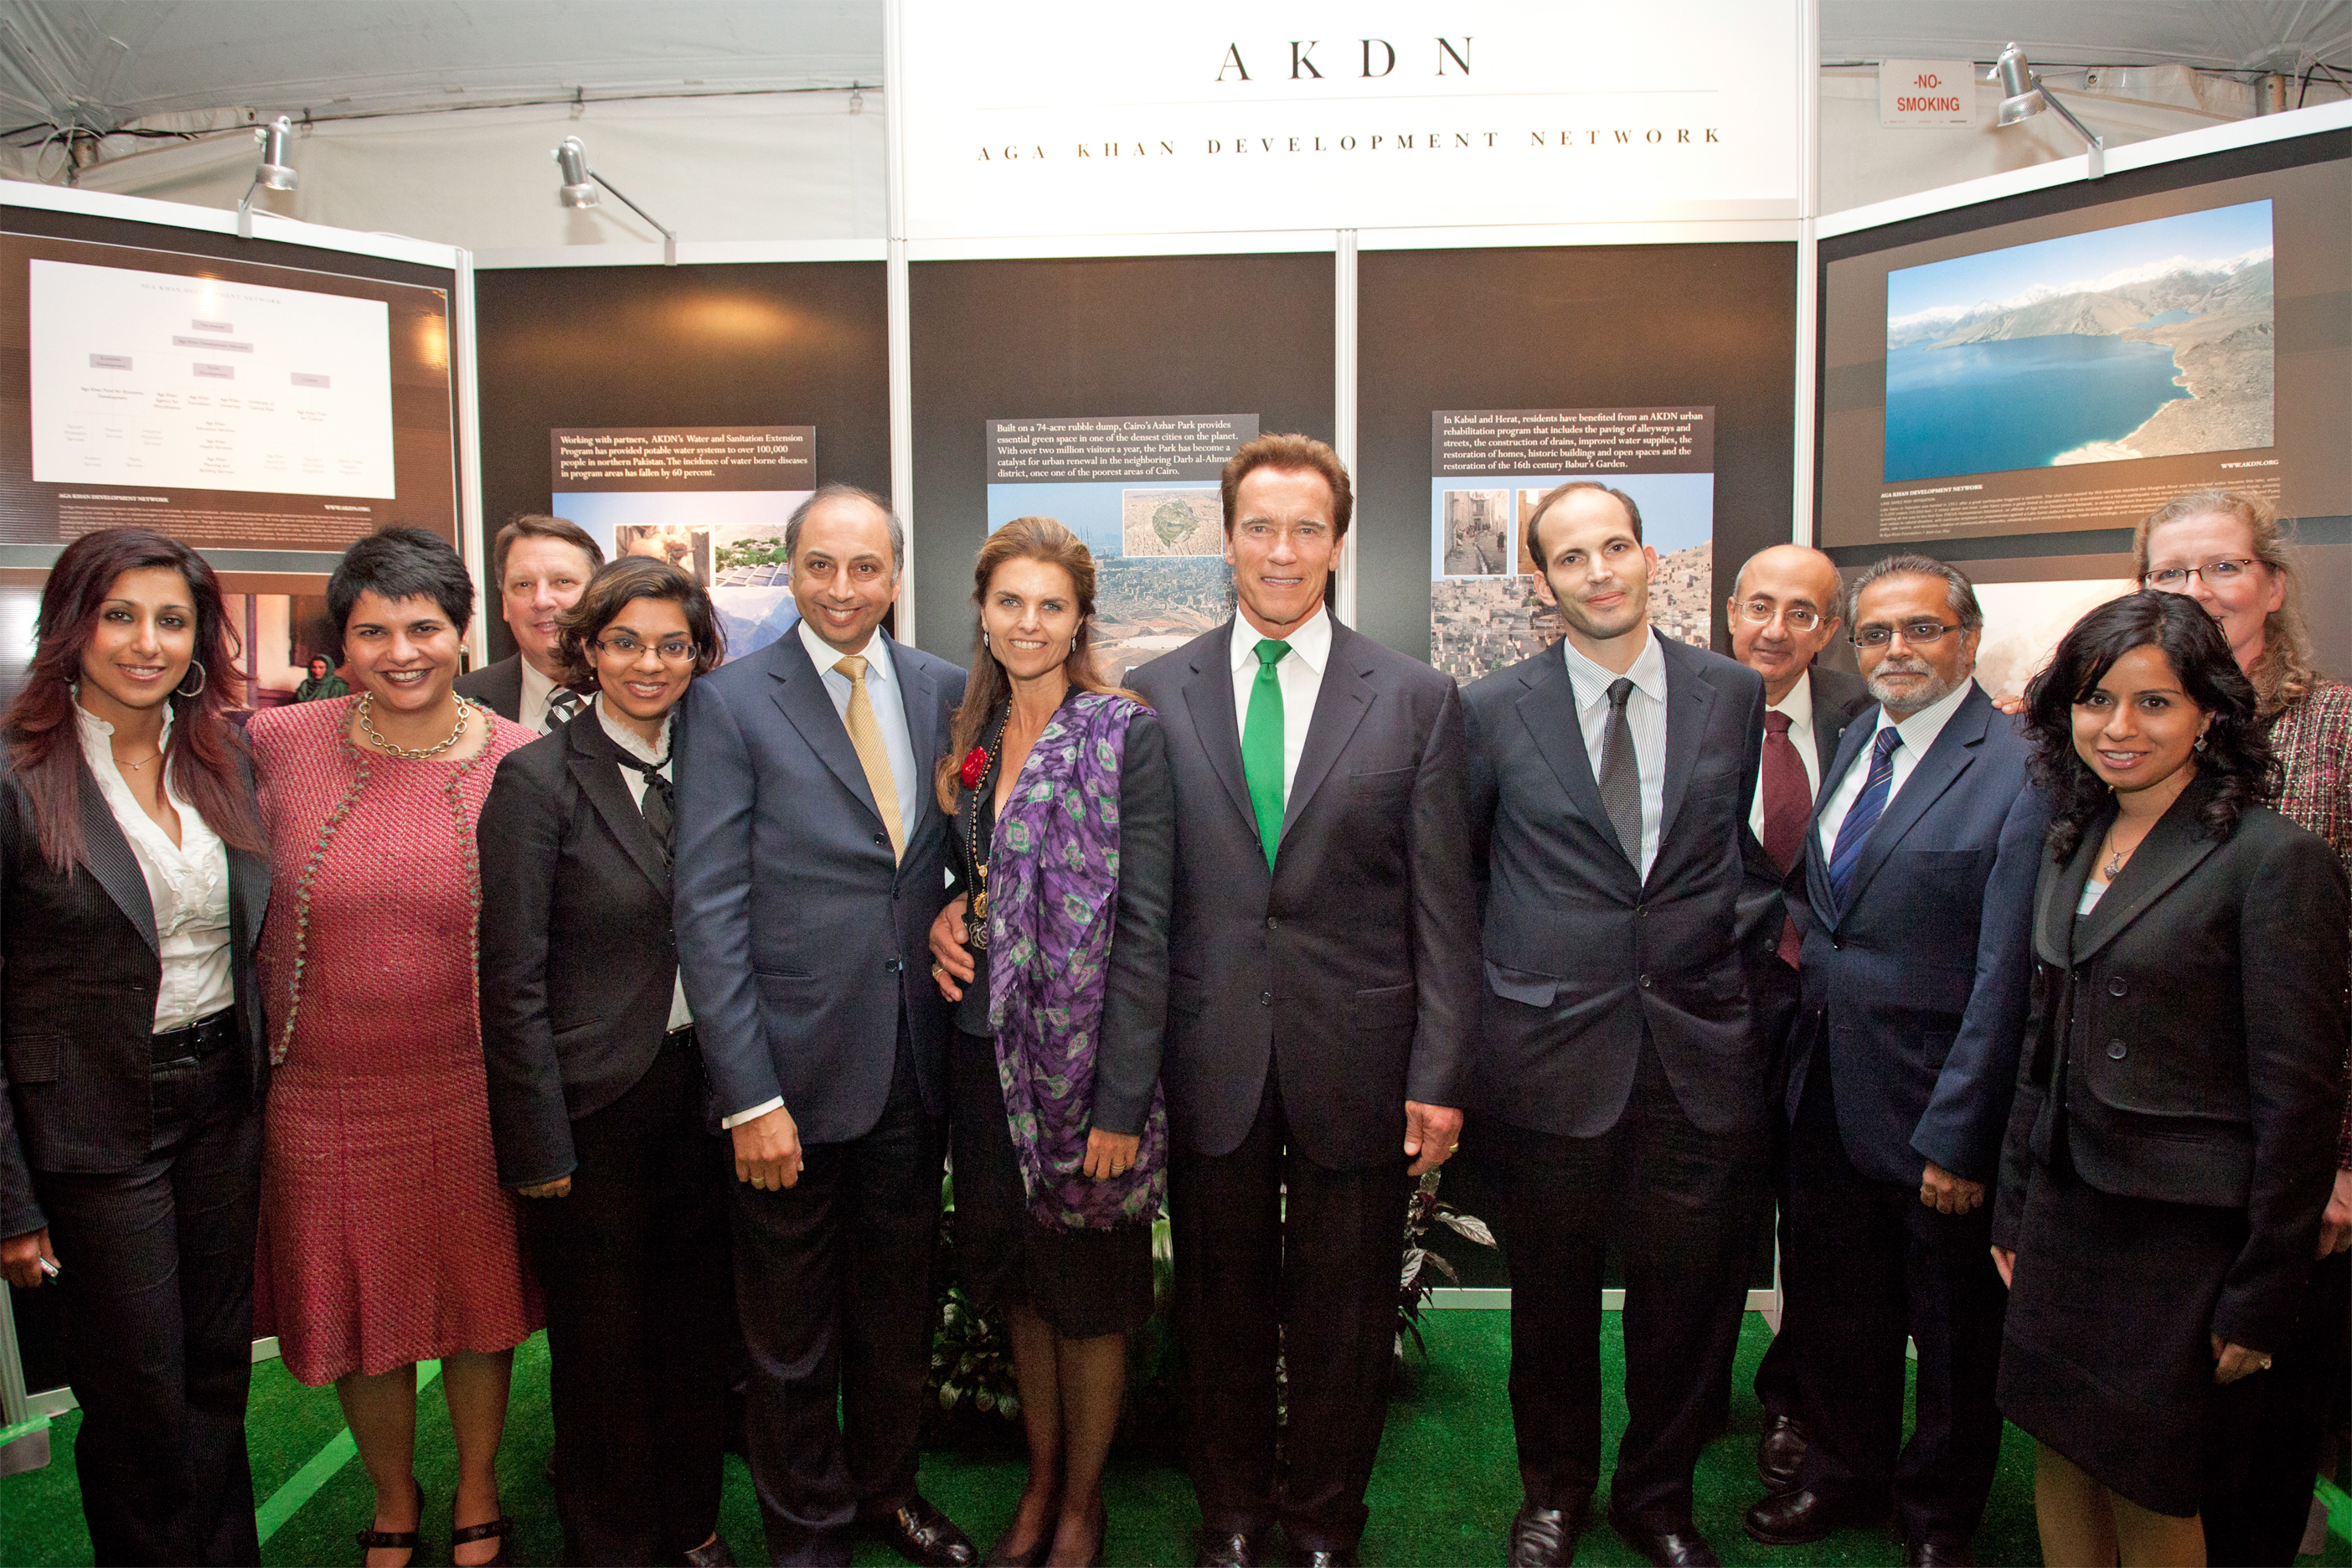 Jamati volunteers and representatives from AKF USA and FOCUS North America gather with Prince Hussain, Governor Schwarzenegger and his wife in front of the AKDN information booth at the Governors’ Global Climate Summit 3, which was hosted at the University of California at Davis. Photo: Farhez Rayani